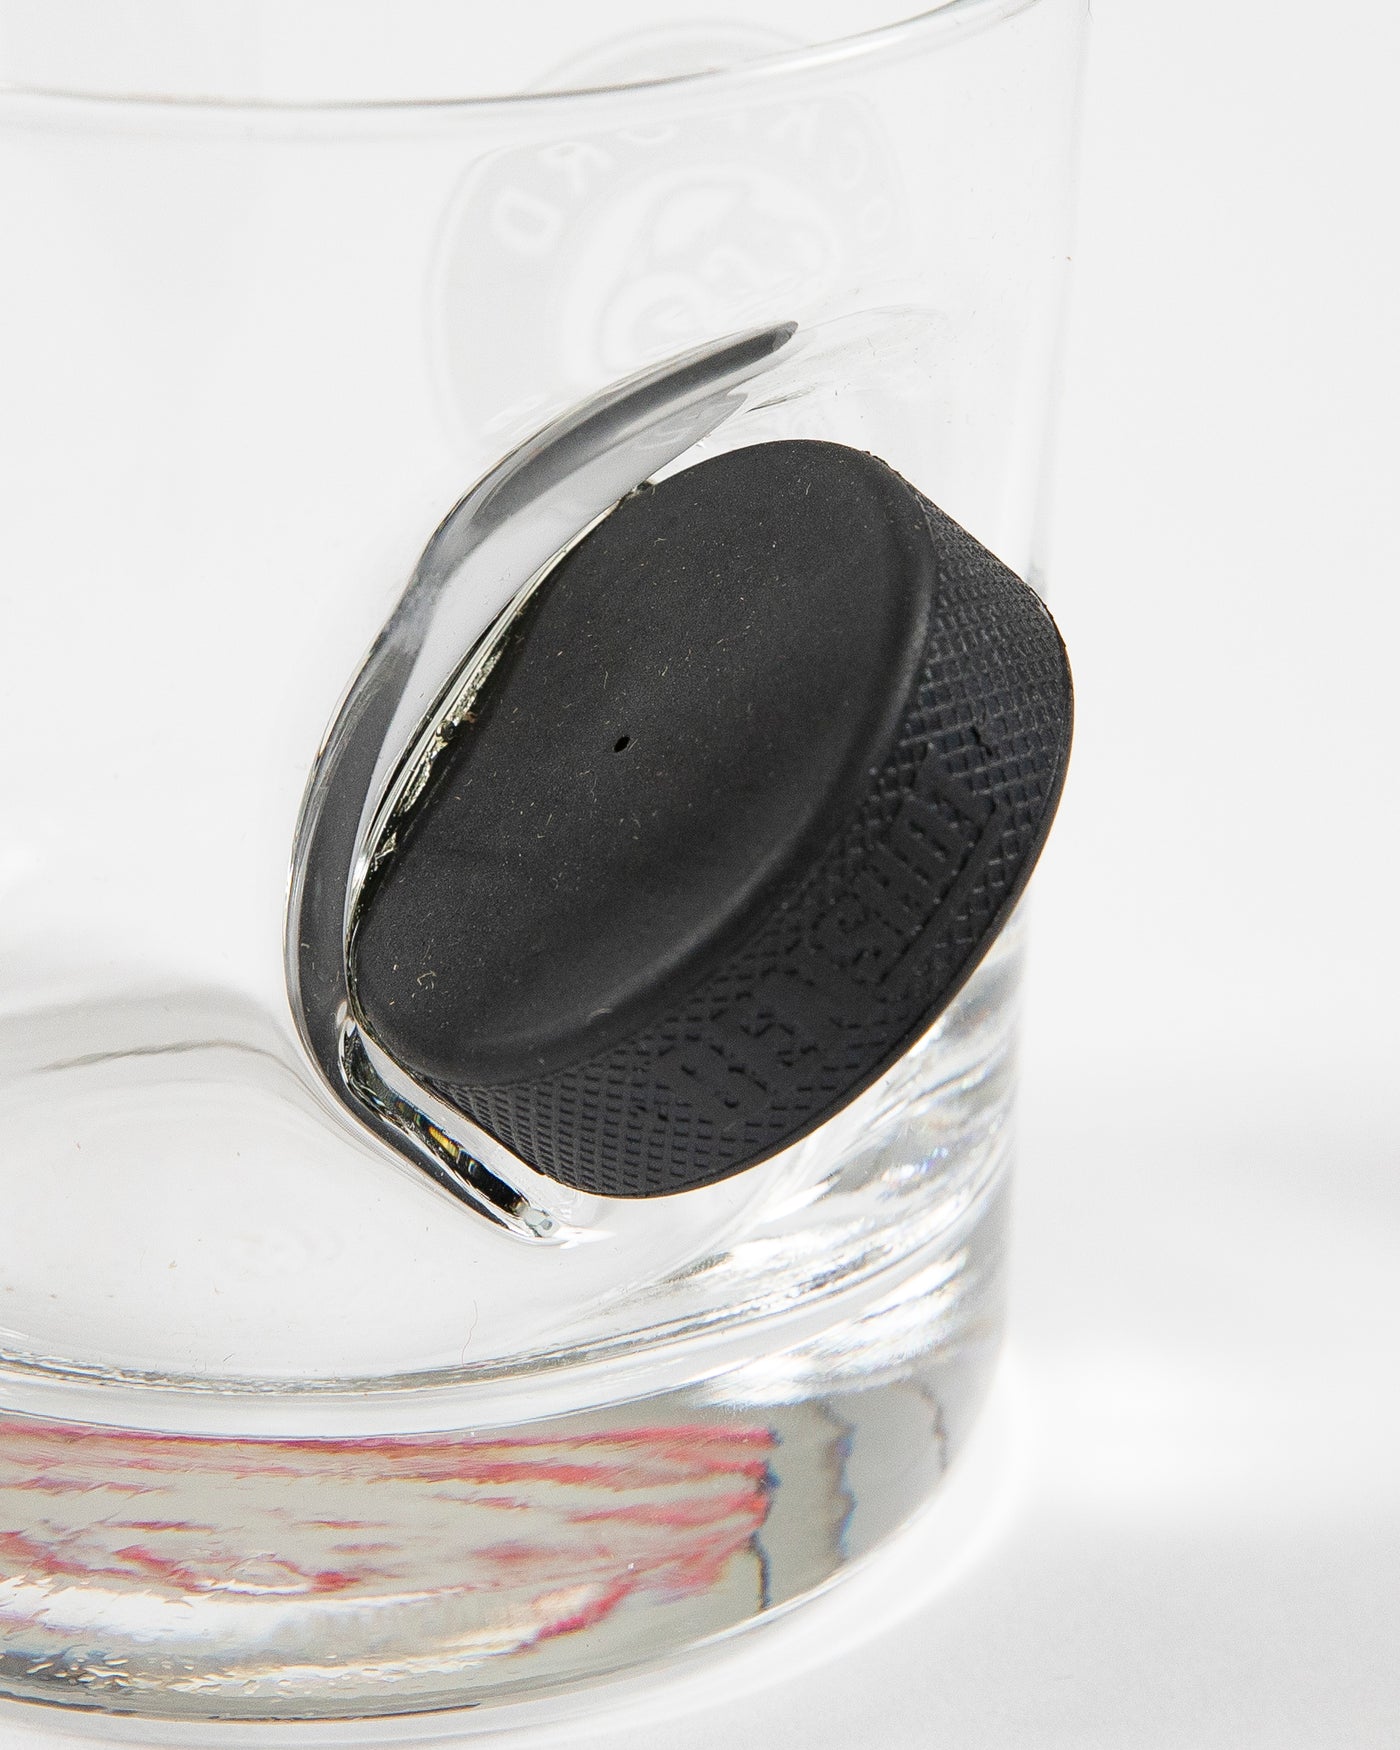 Rockford IceHogs rocks glass with puck going through glass - detail lay flat